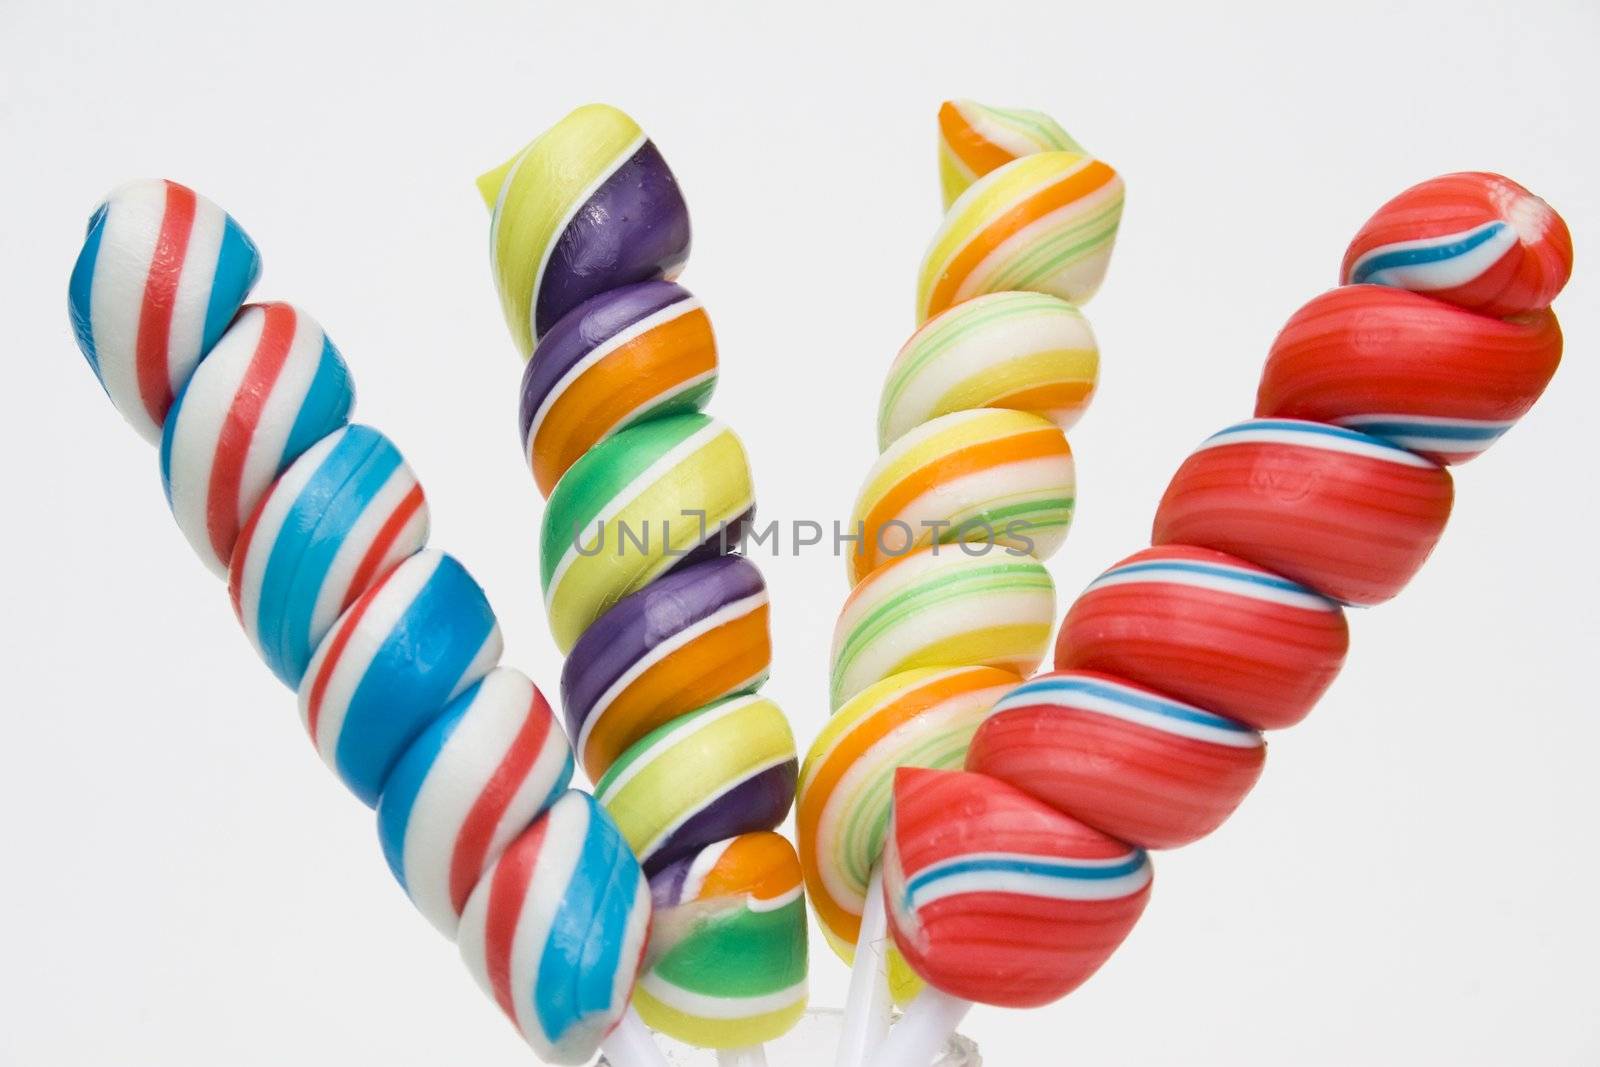 Twisted brightly colored candies on stick against a white background